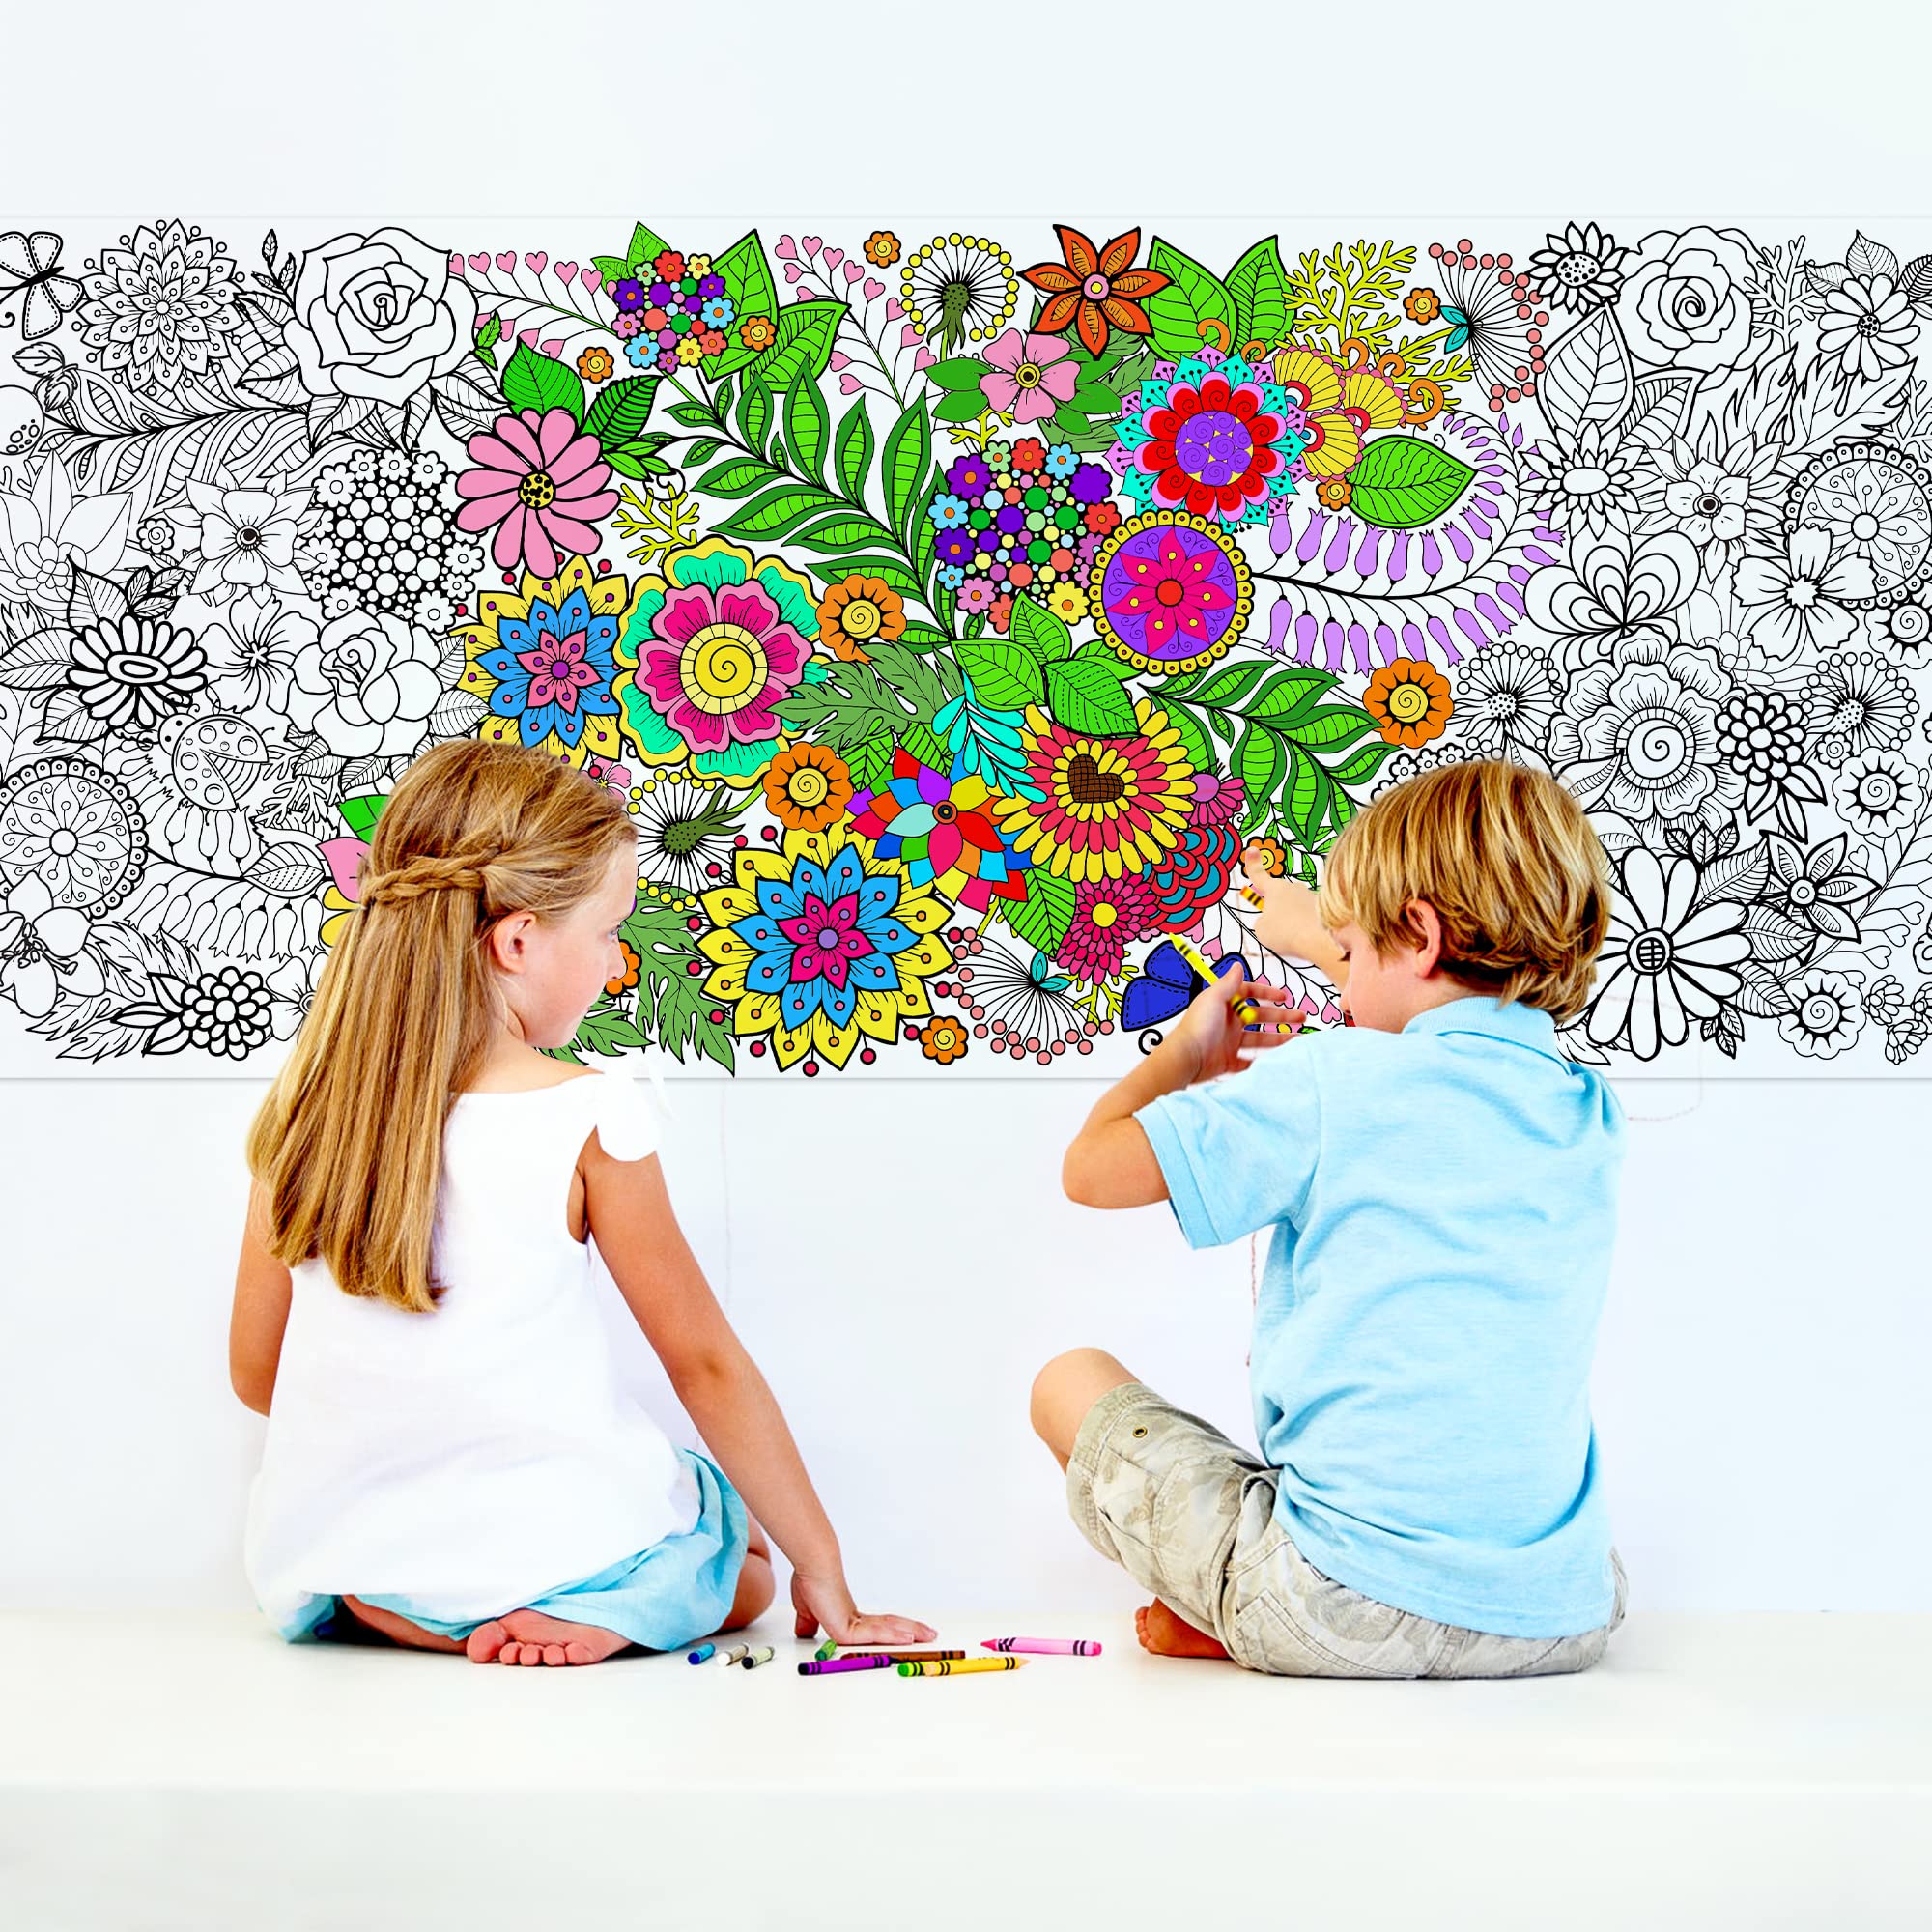 Dvbonike Jumbo Mandala Coloring Poster Giant Flower DIY Color-in Paper Art Blank Banner 55.1 x 23.6 Inch Drawing Tablecloth Wall Decor Party School Class Activities for Kids Arts Craft Suppiles